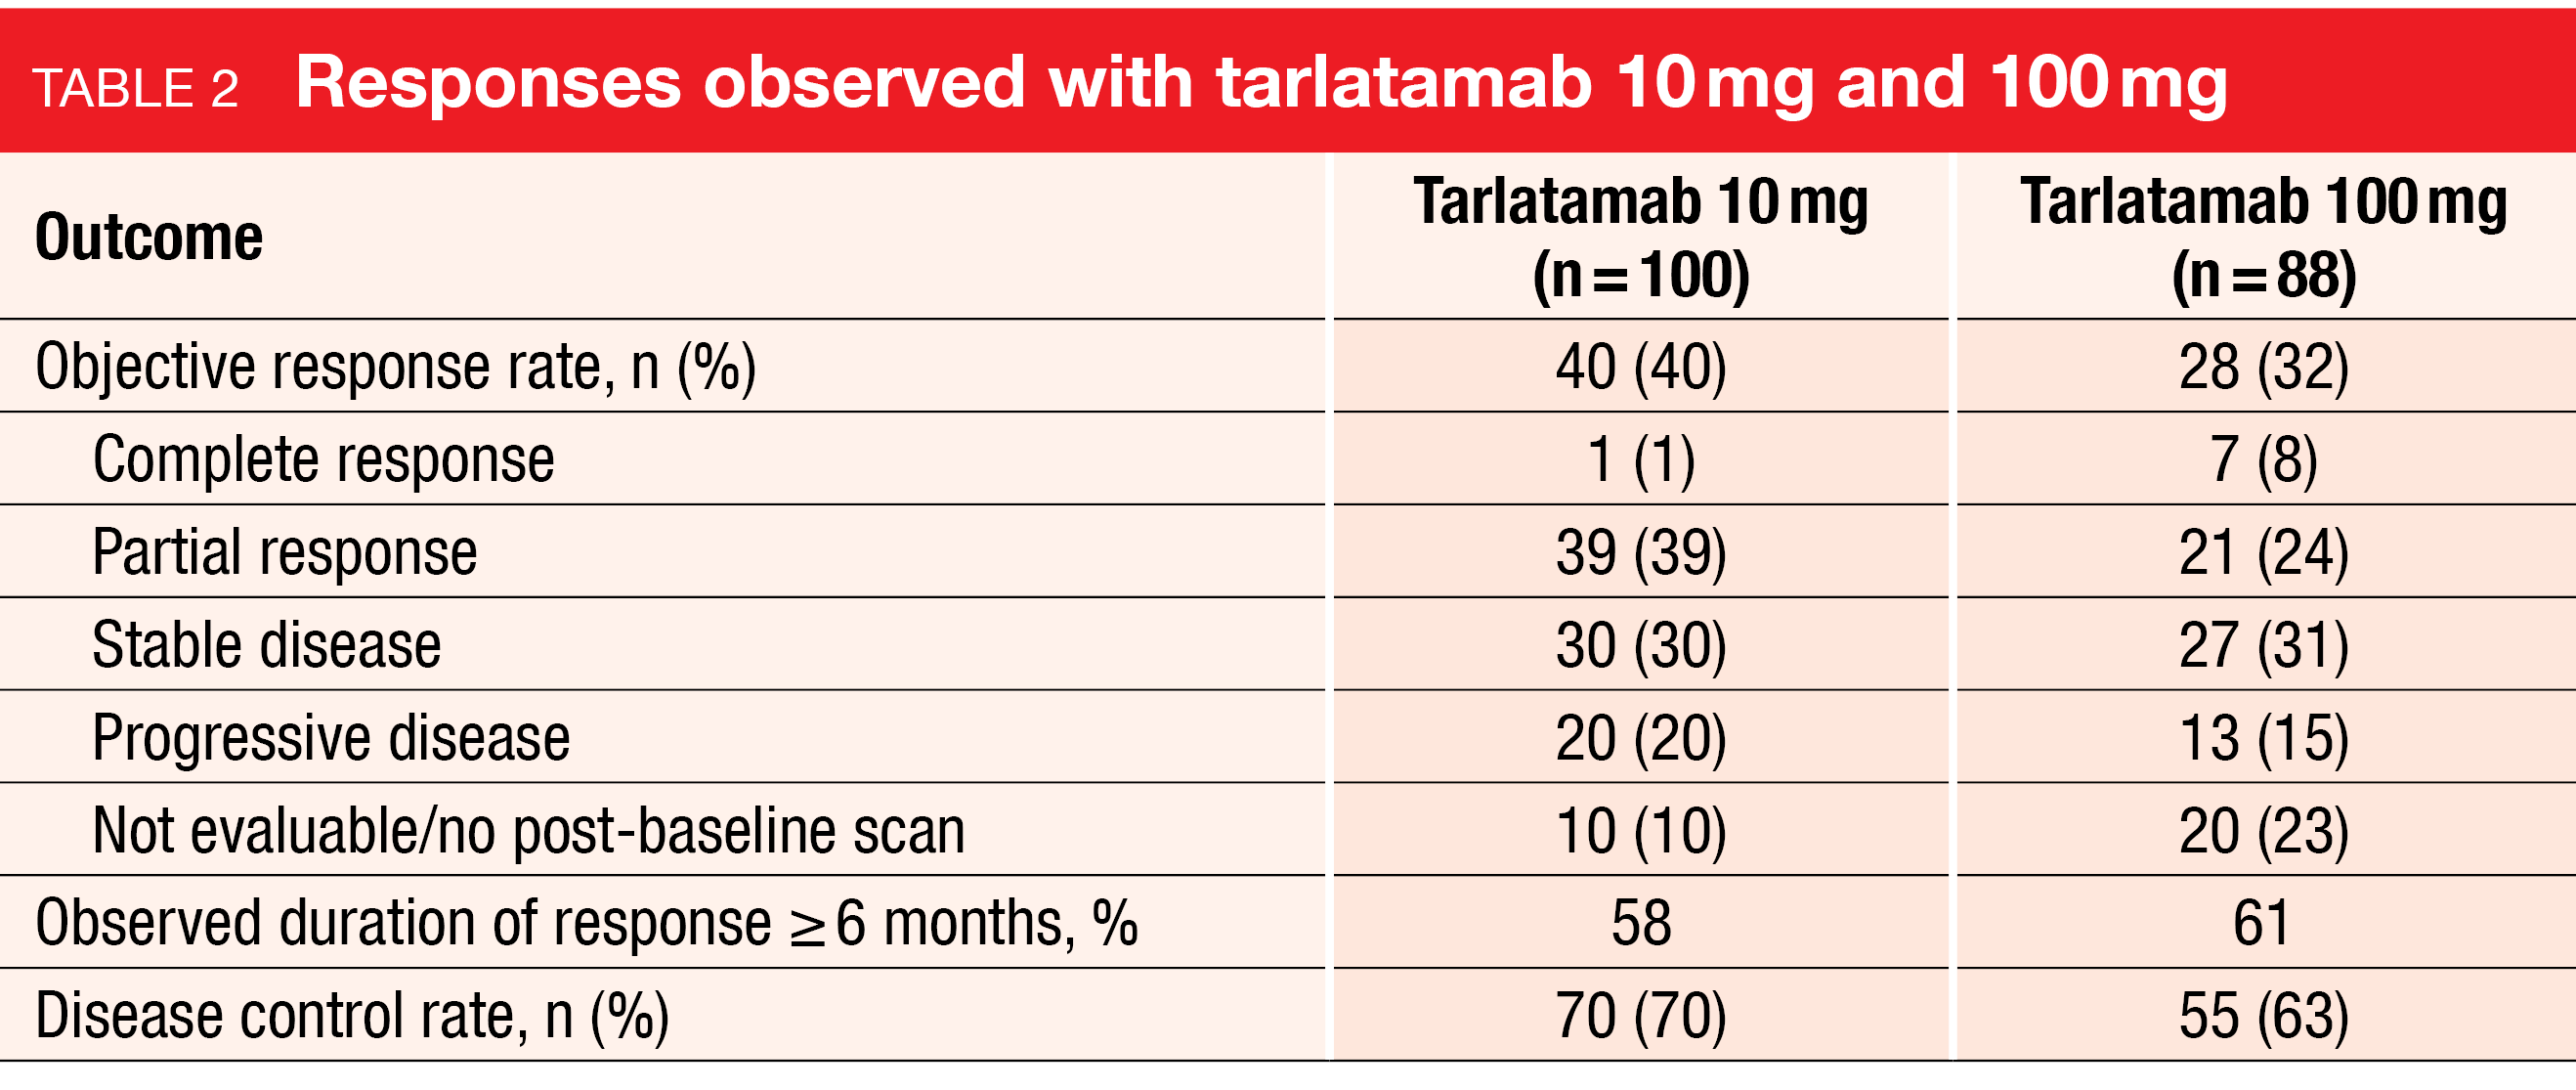 Table 2 Responses observed with tarlatamab 10 mg and 100 mg